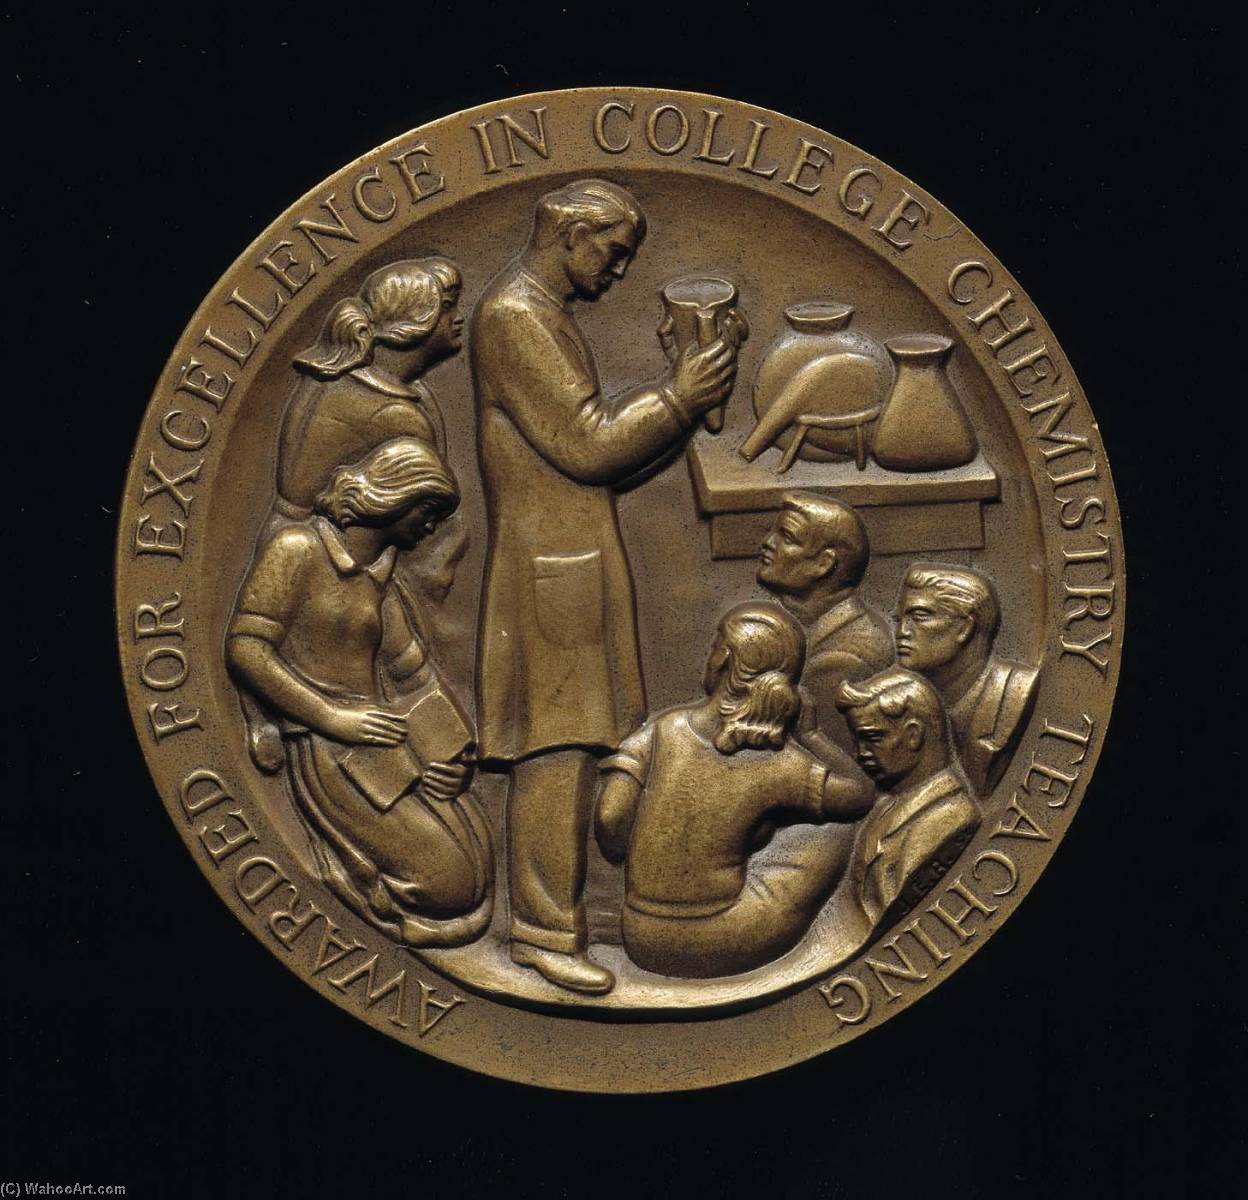 WikiOO.org - Encyclopedia of Fine Arts - Lukisan, Artwork Joseph Emile Renier - Manufacturing Chemists Association Medal for Excellence in College Chemistry Teaching